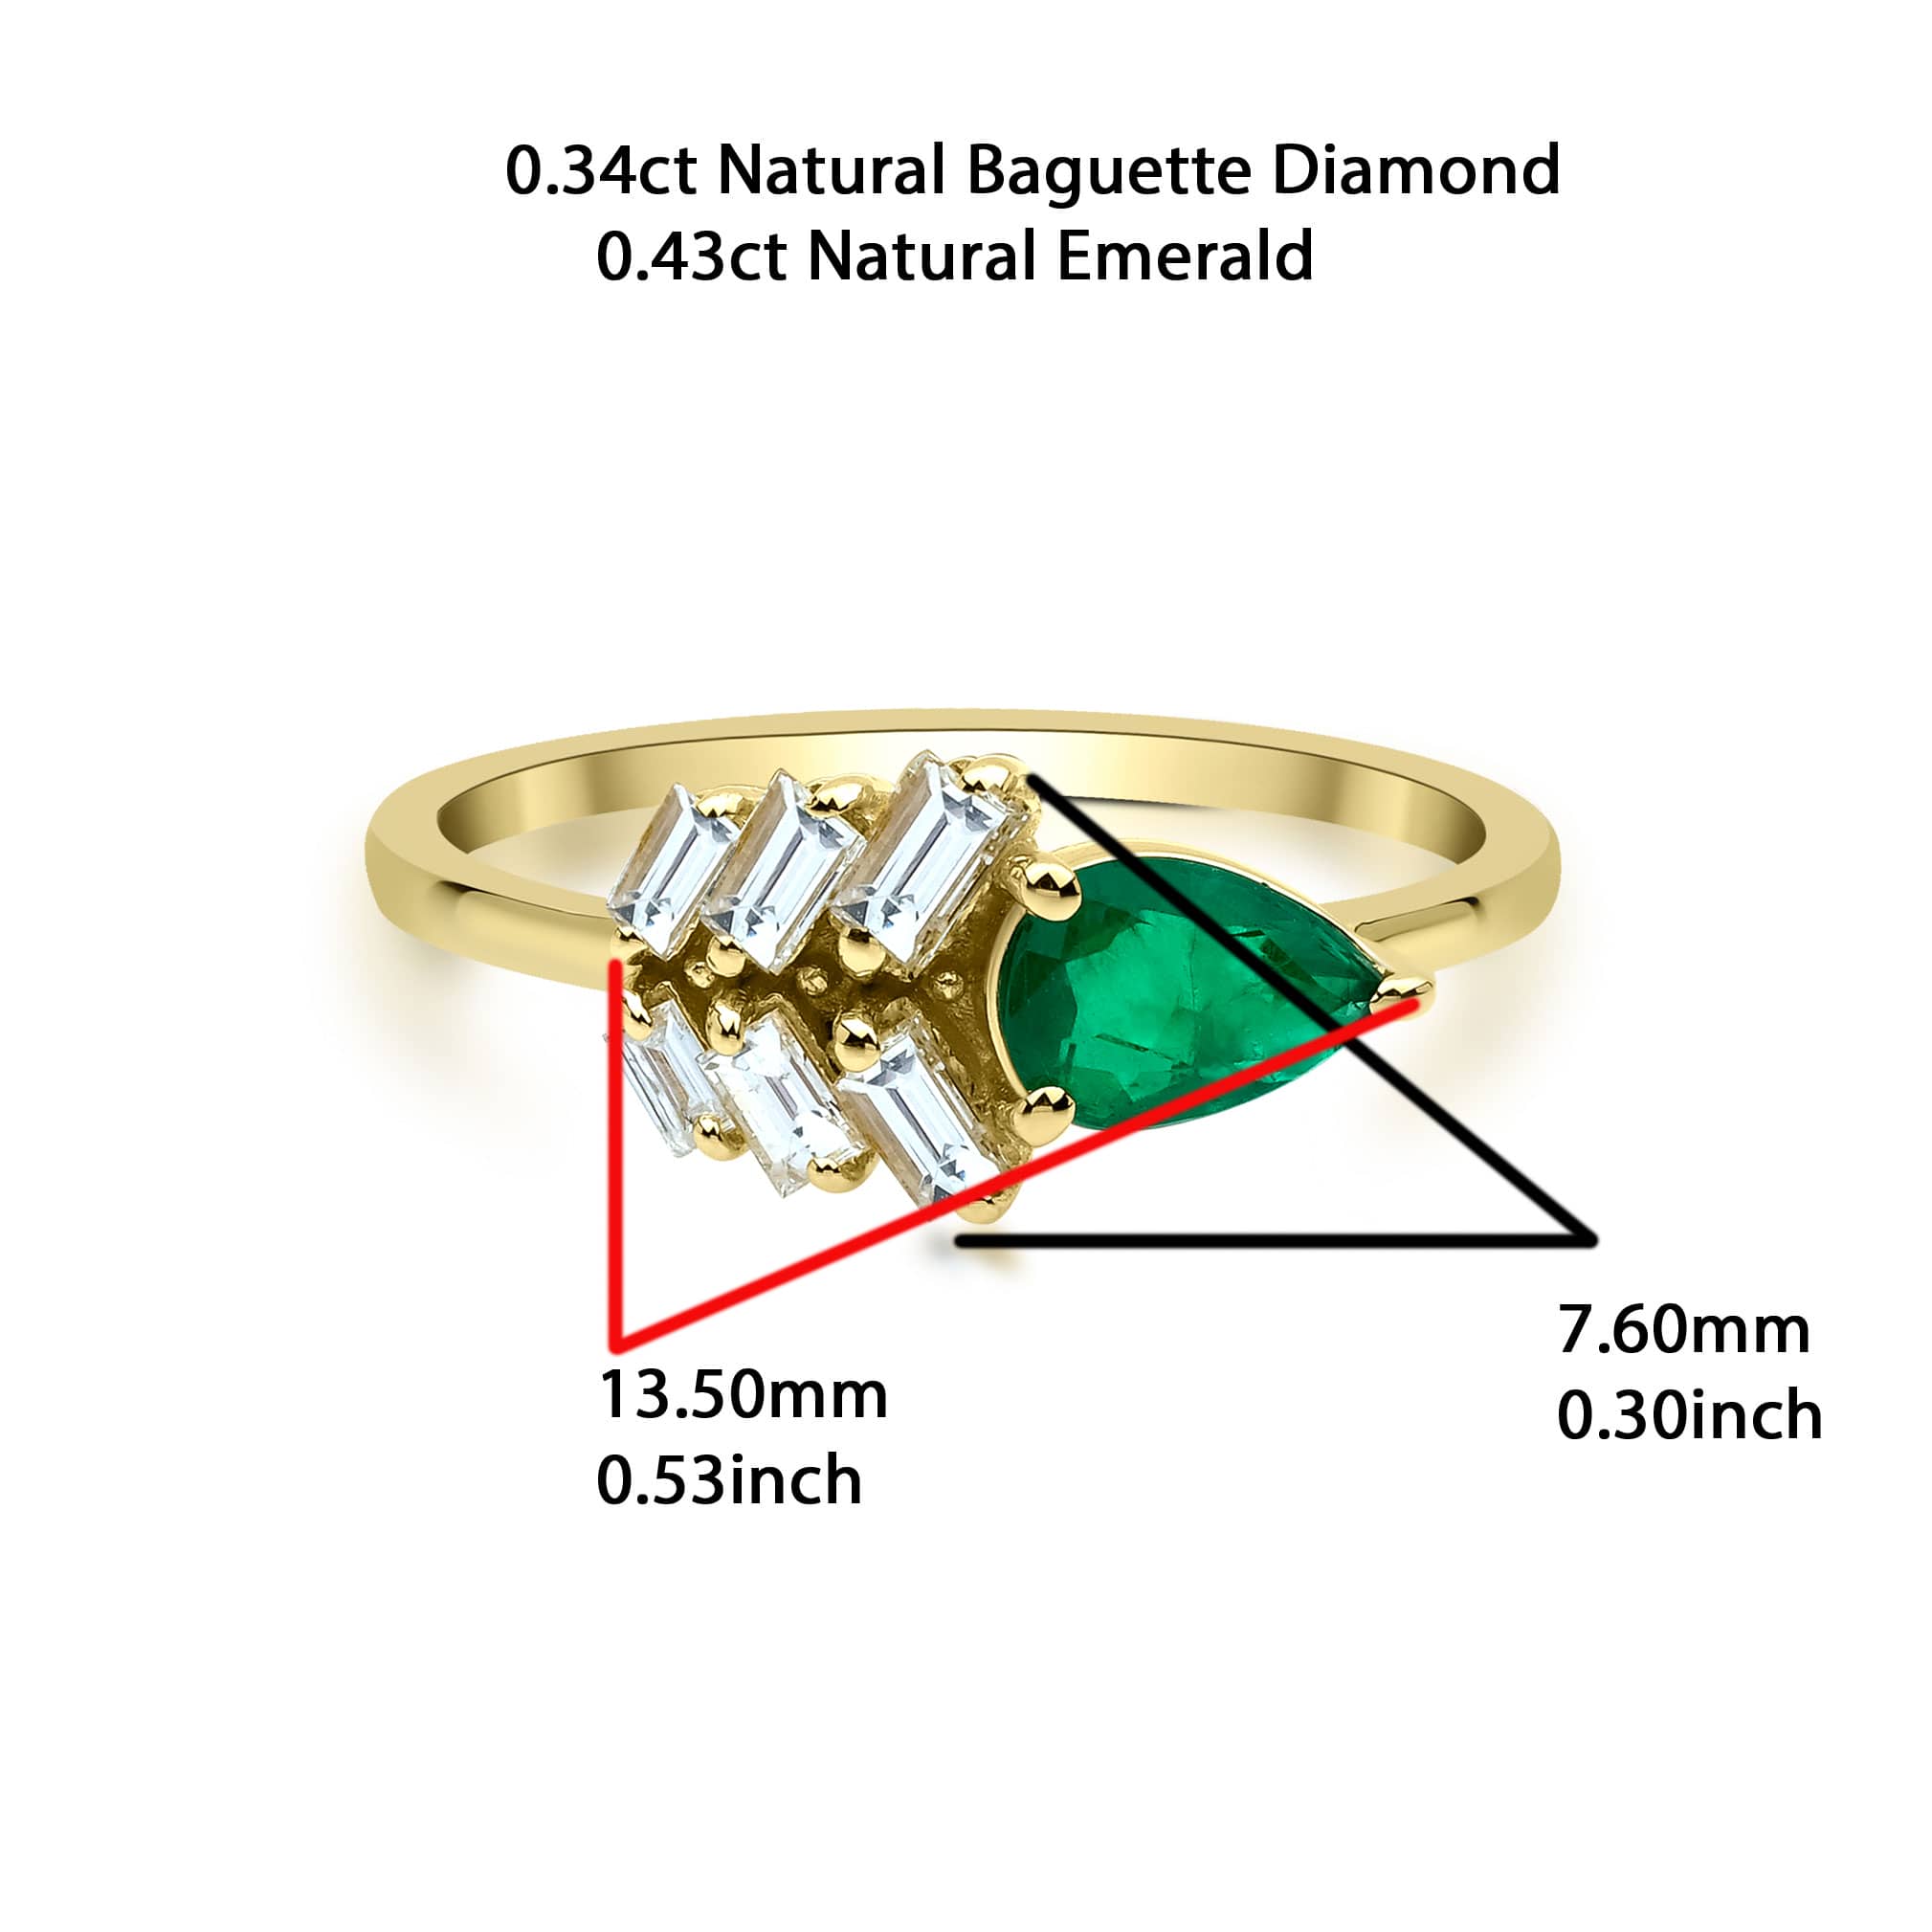 Emerald And Baguette 0.77ct Diamond Ring